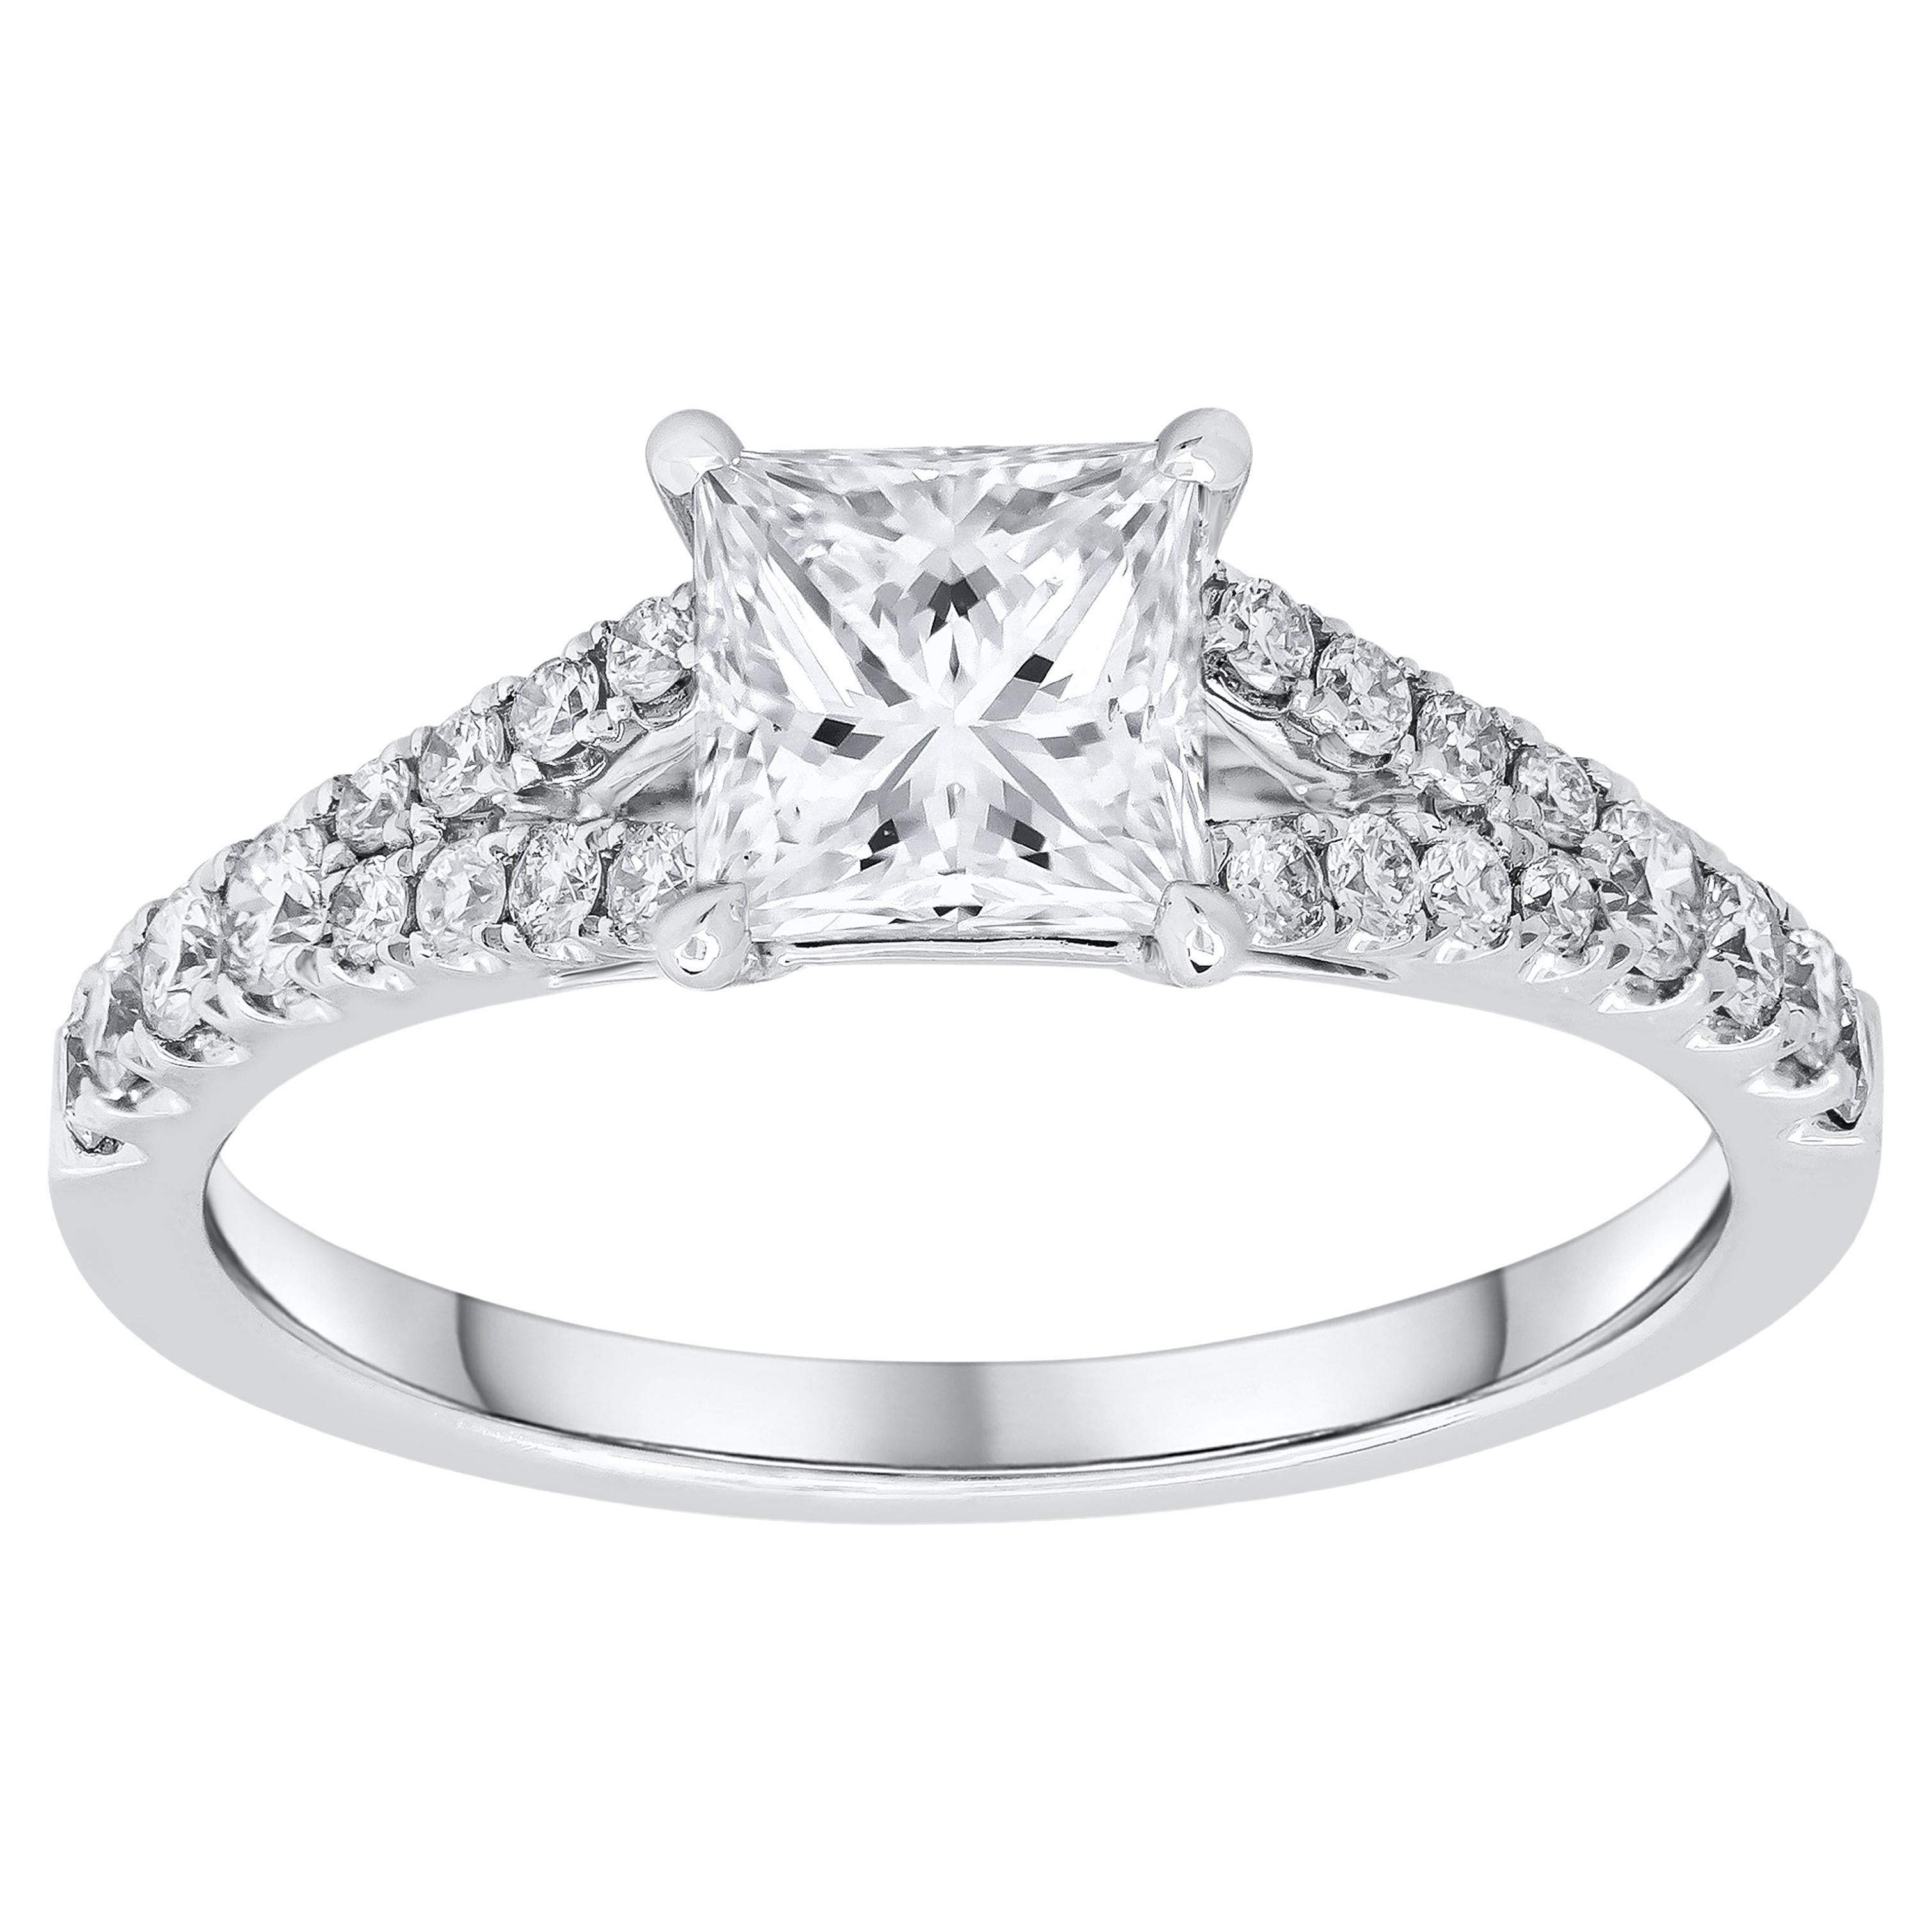 GIA Certified 1.06 Carats Princess Cut Diamond Engagement Ring with Side Stones